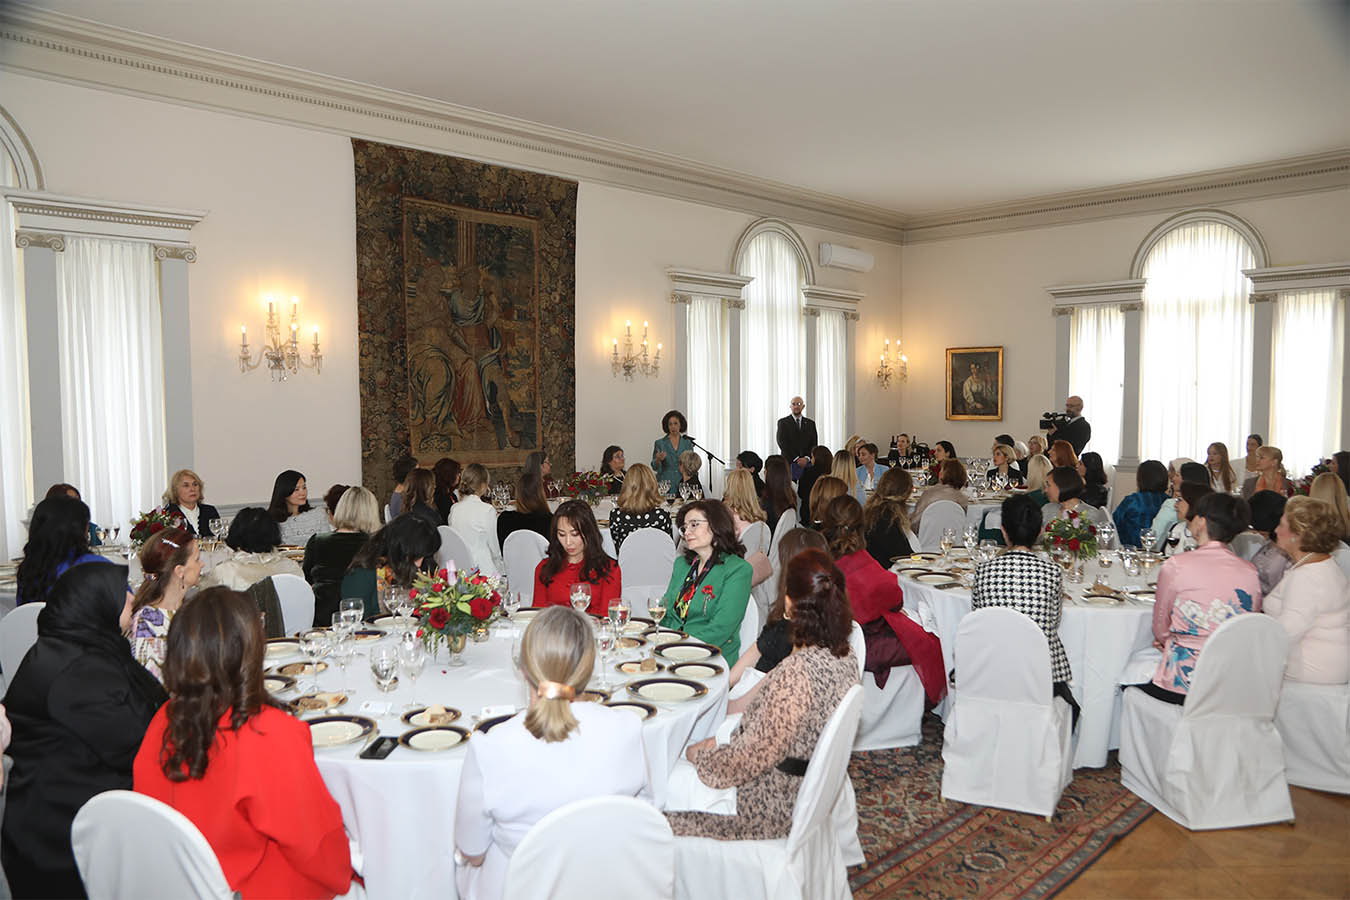 HRH Crown Princess Katherine addressing the guests at the Ladies’ Lunch